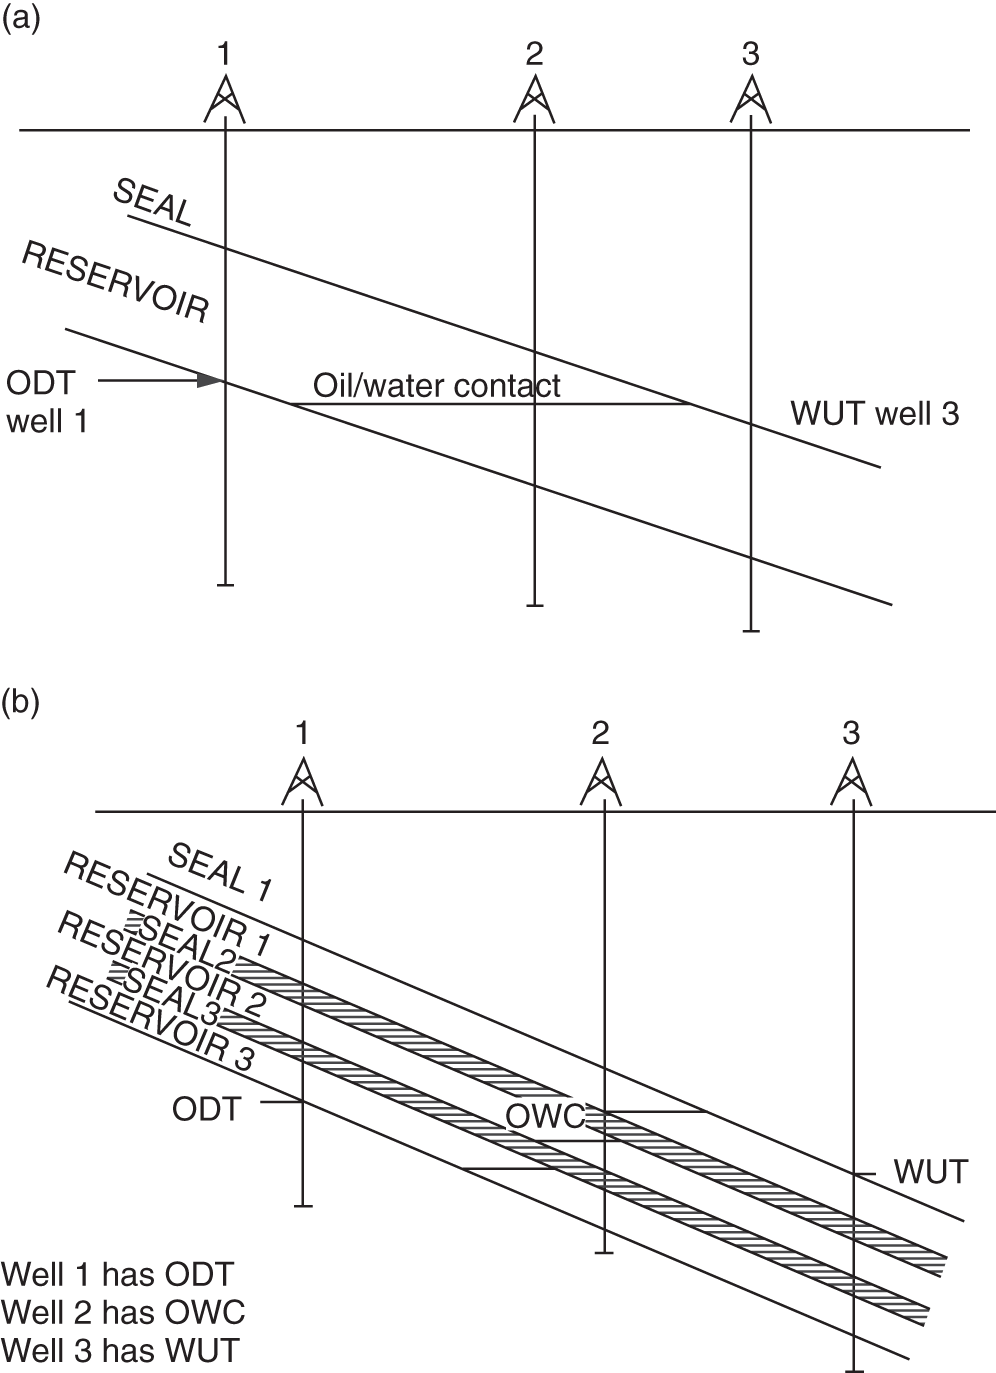 (a) The oil/water contact penetrated by well 2 lies between the ODT in well 1 and the “water up to” (WUT) in well 3. (b) Superficially, the well results displayed here are the same as those in (a): the oil/water contact penetrated by well 2 lies between the ODT in well 1 and the WUT in well 3.